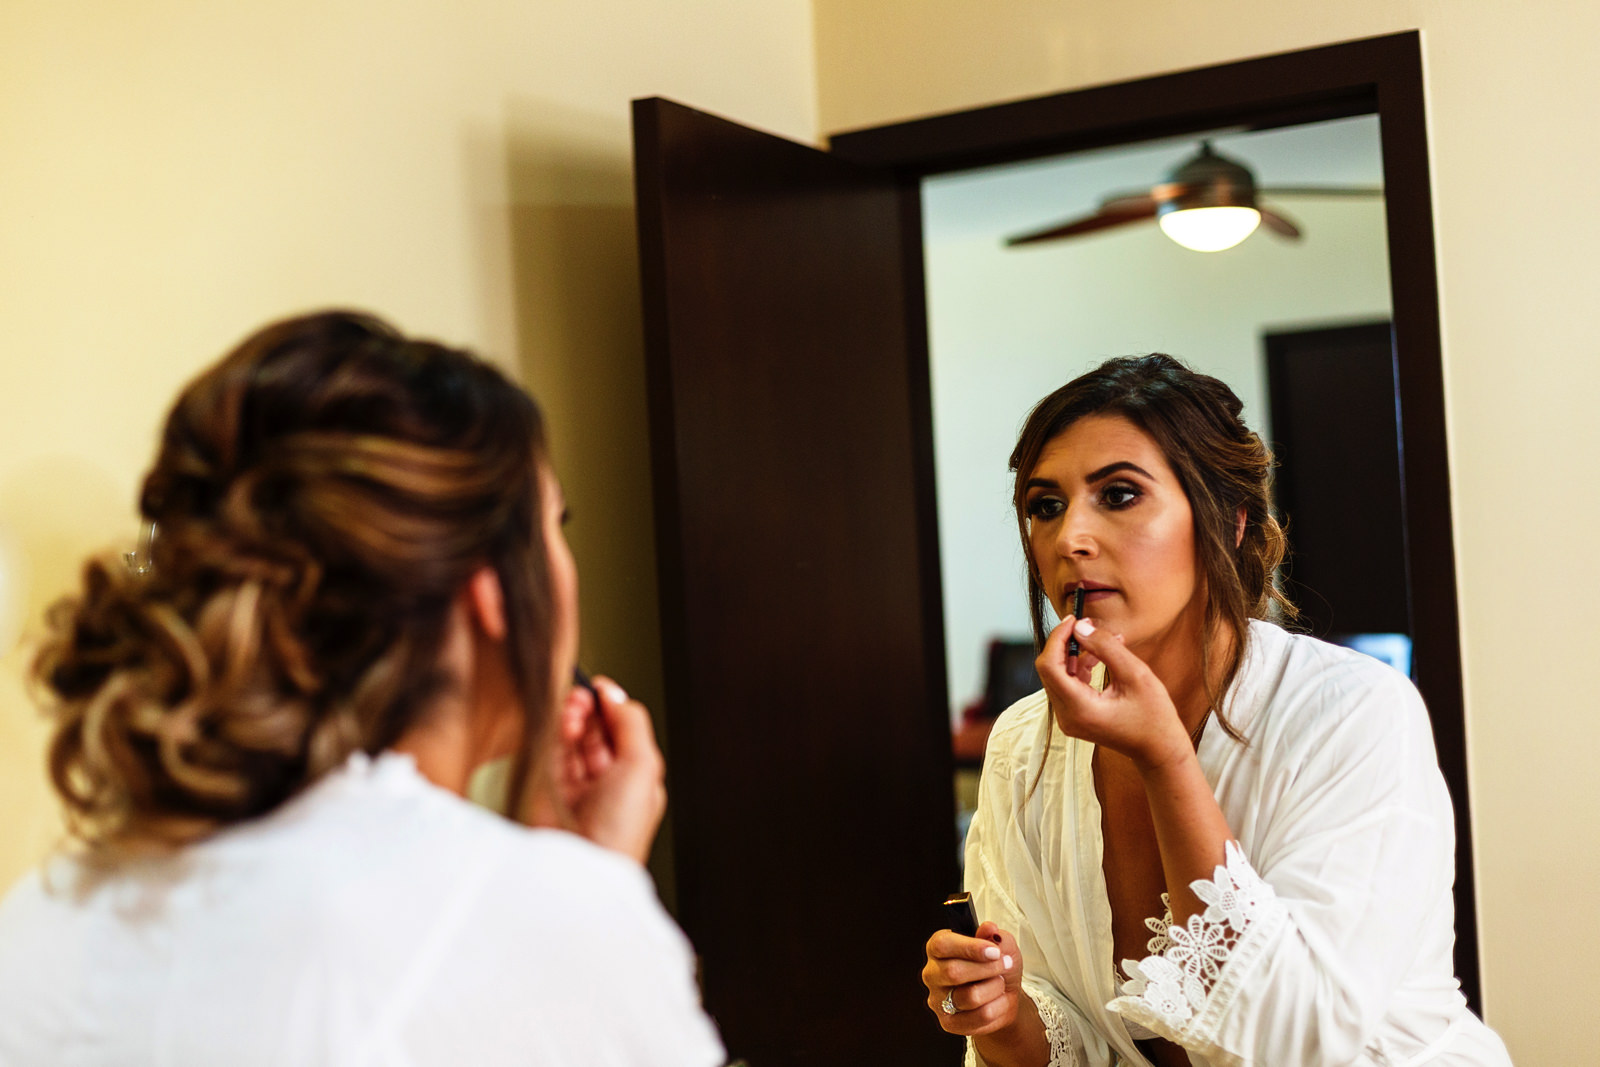 Bride doing her own make-up in front of the mirror of the bathroom